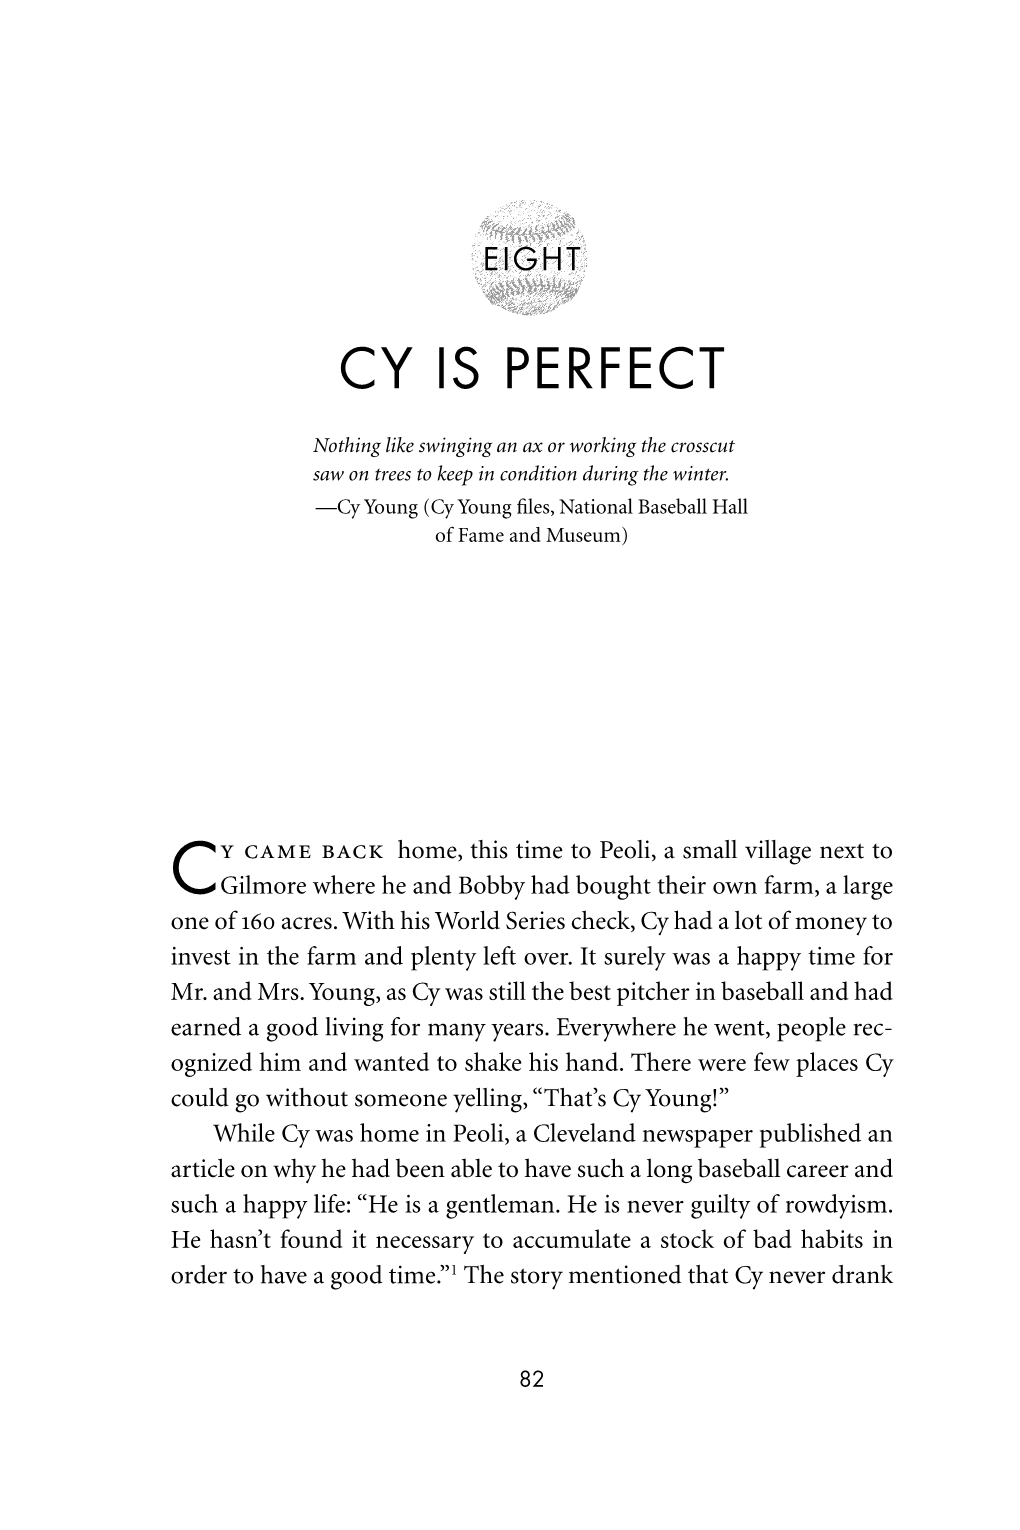 Sample Chapter: Cy Is Perfect